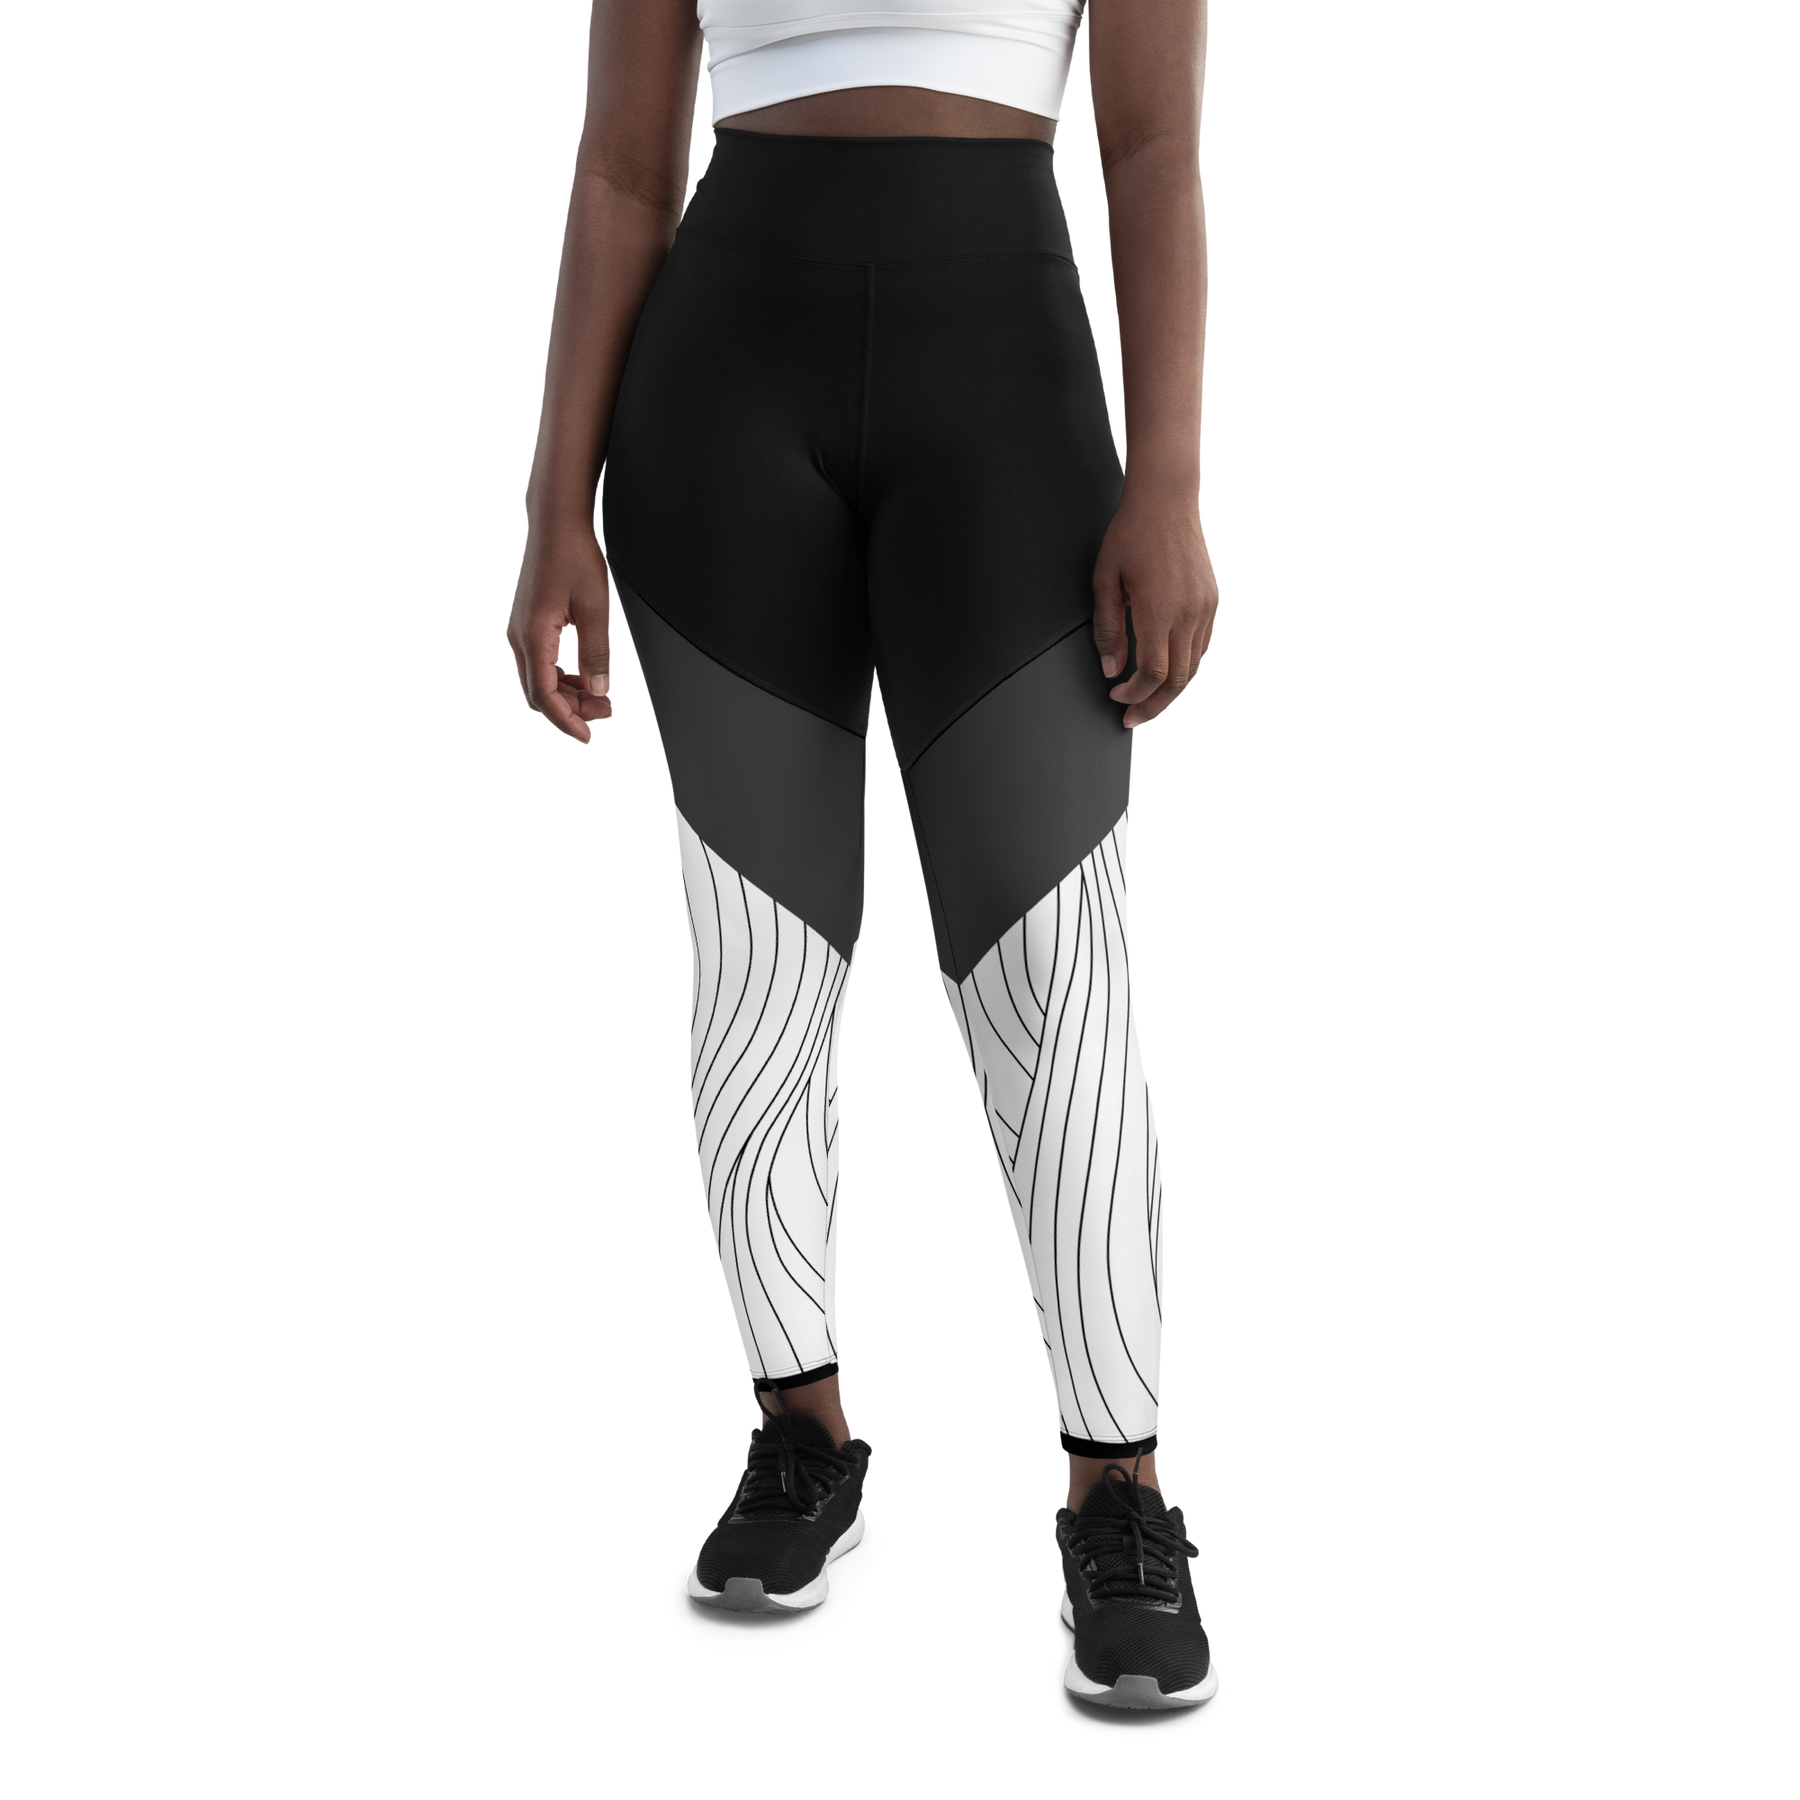 Ink Splatter Compression Leggings, Flattering Non-see-through and